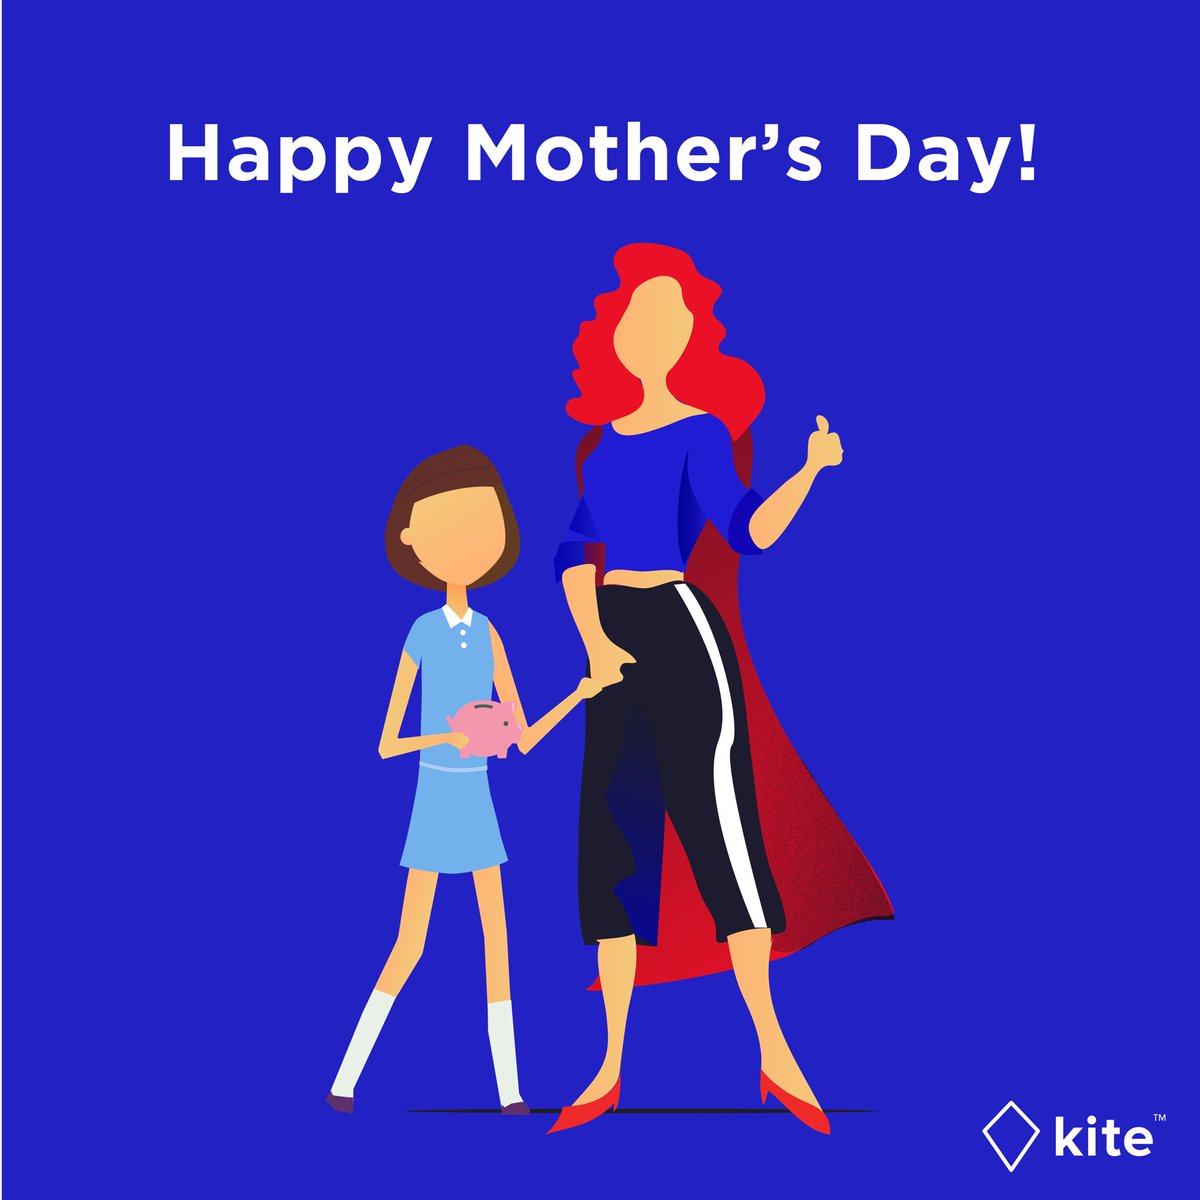 Happy Mother’s Day to the first financial guide of our lives!
#happymothersday #momsofinstagram #momsday #mothersday #financialadvisor #guide #financialguidance #moneysaver #superwoman #india #neweconomy #accountspayable #expensestracker #expenses #corporatecard